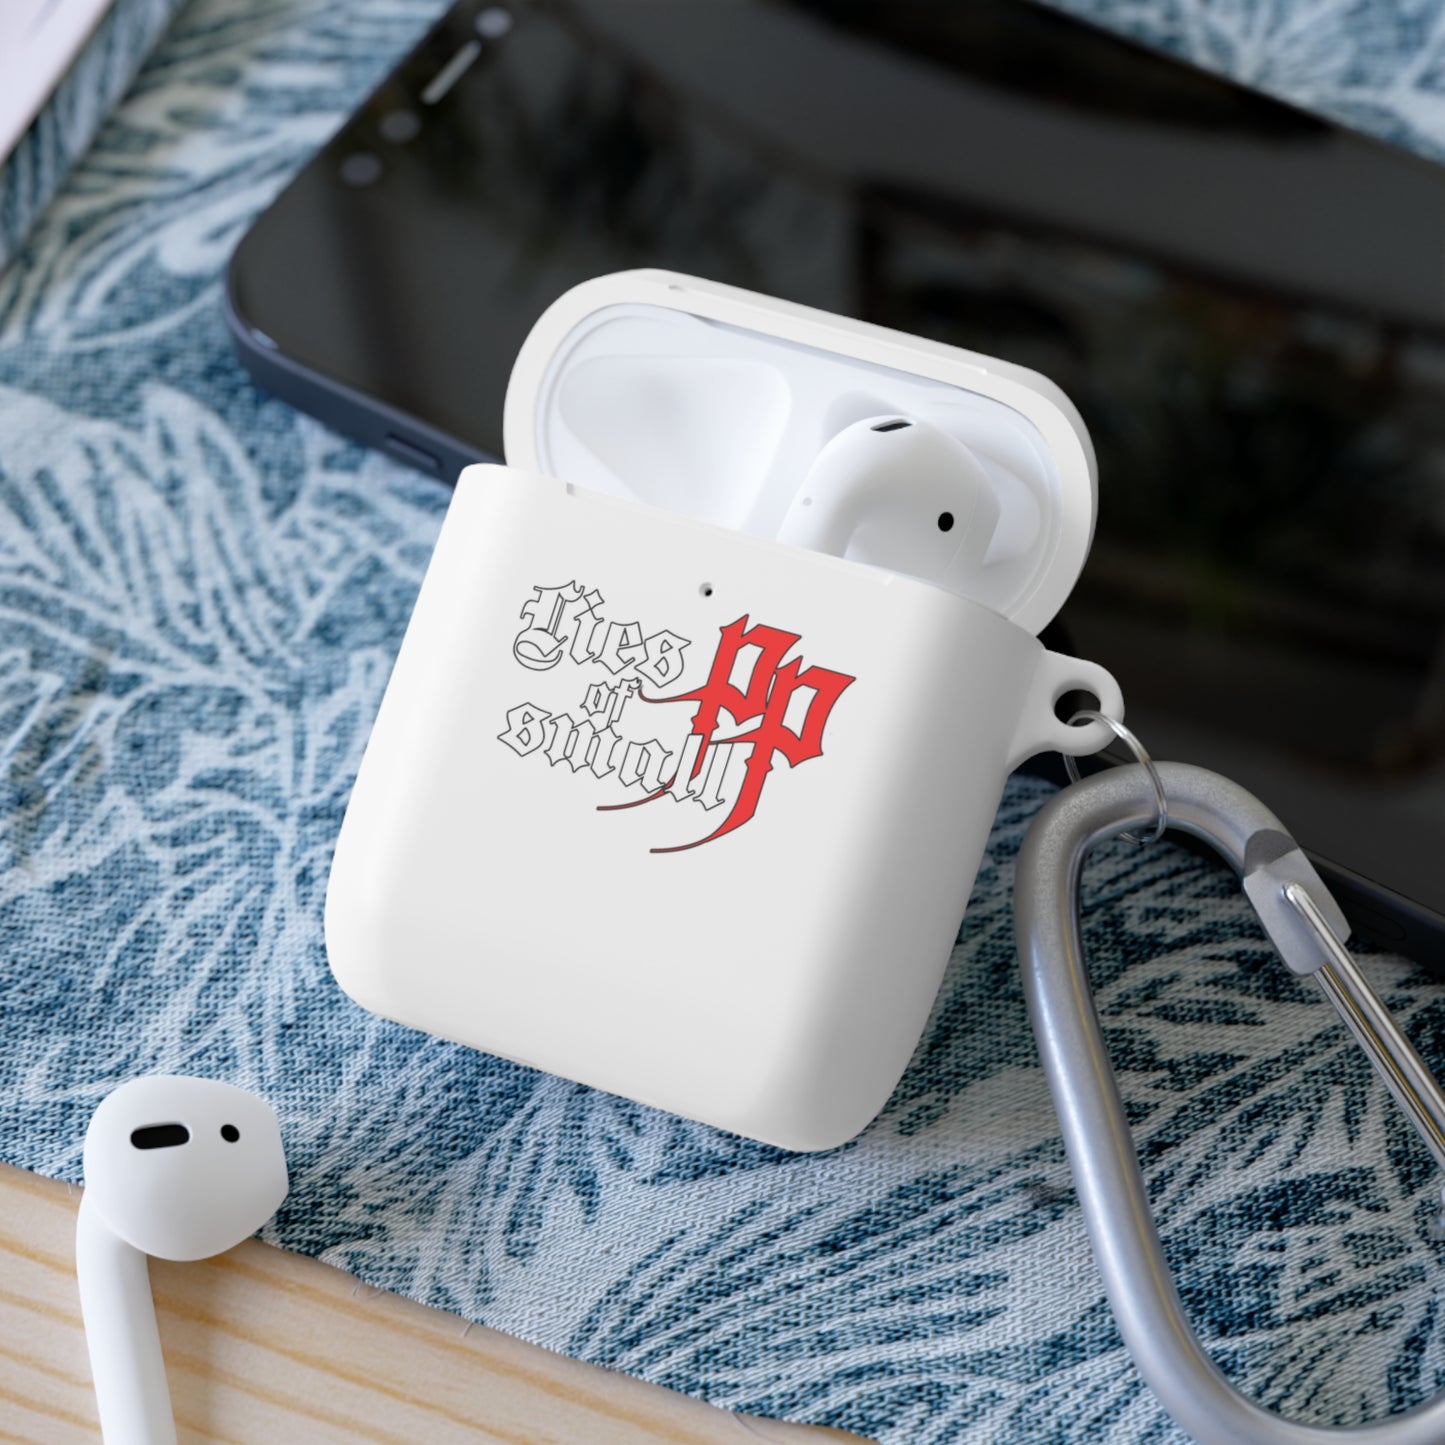 Lies of P AirPods/AirPods Pro Case Cover - Lies of Small PP